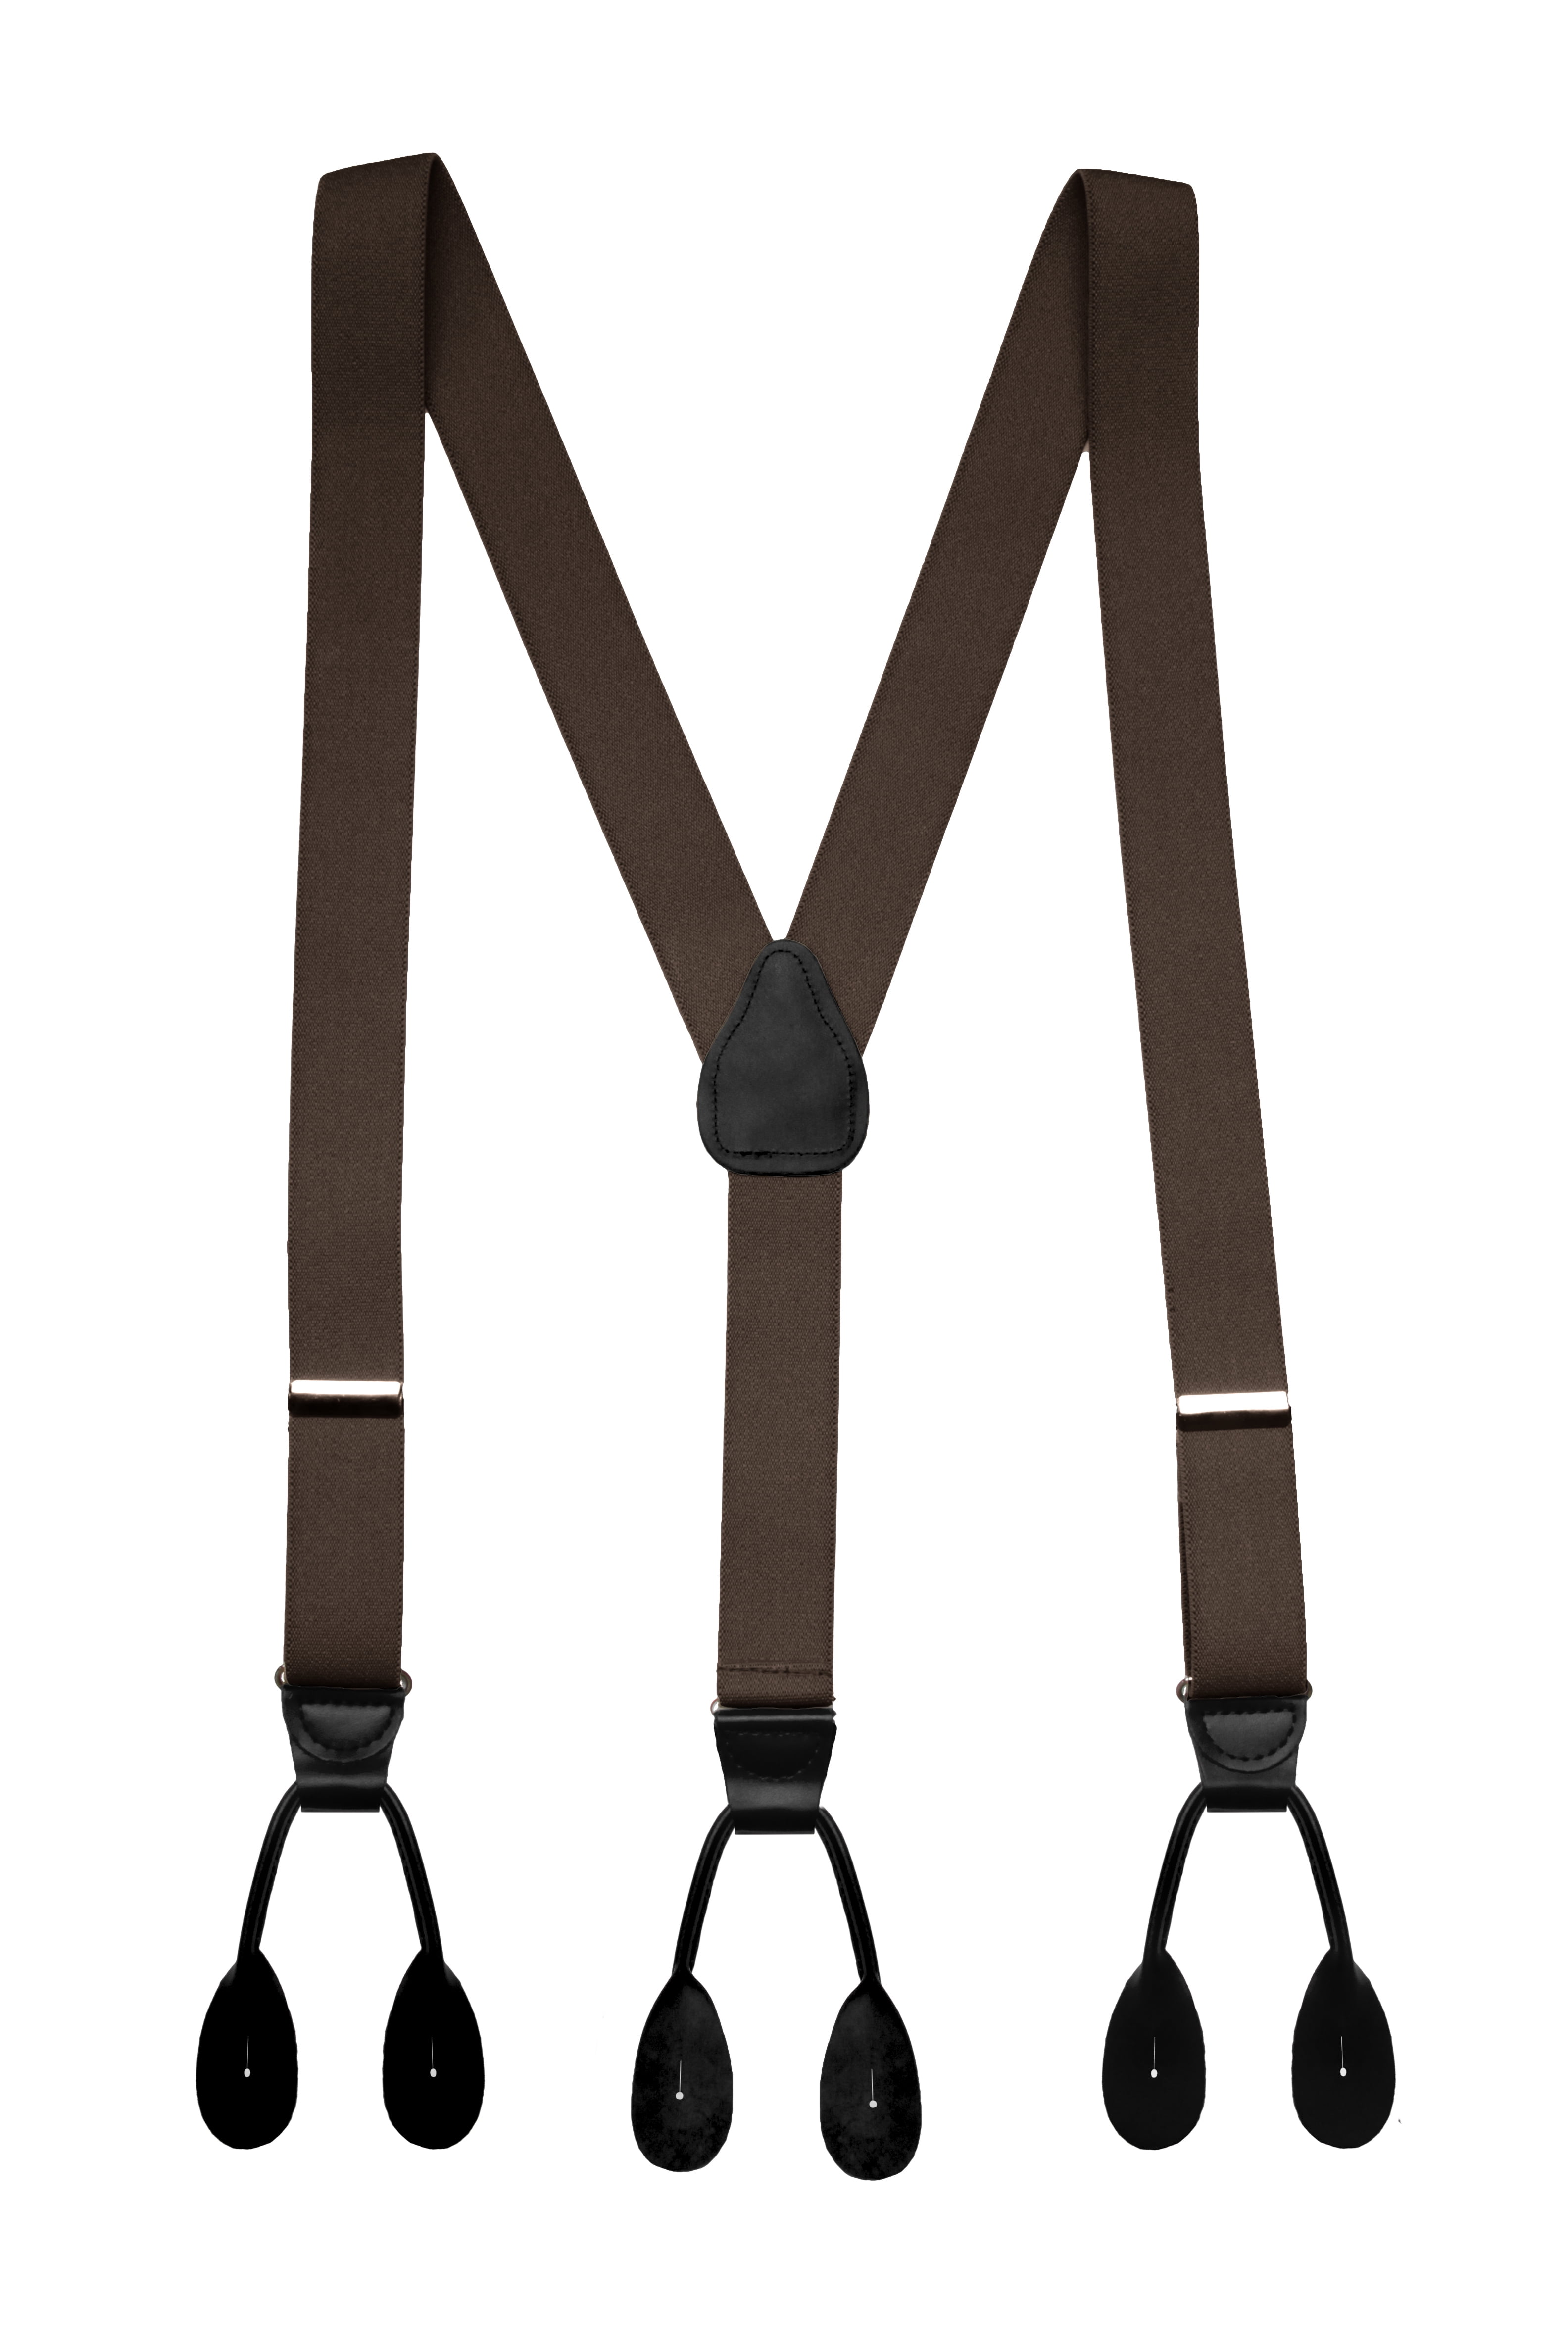 Hold'Em Suspenders for Men Y-Back Leather Trimmed Button End Tuxedo Suspenderss Many colors and designs 